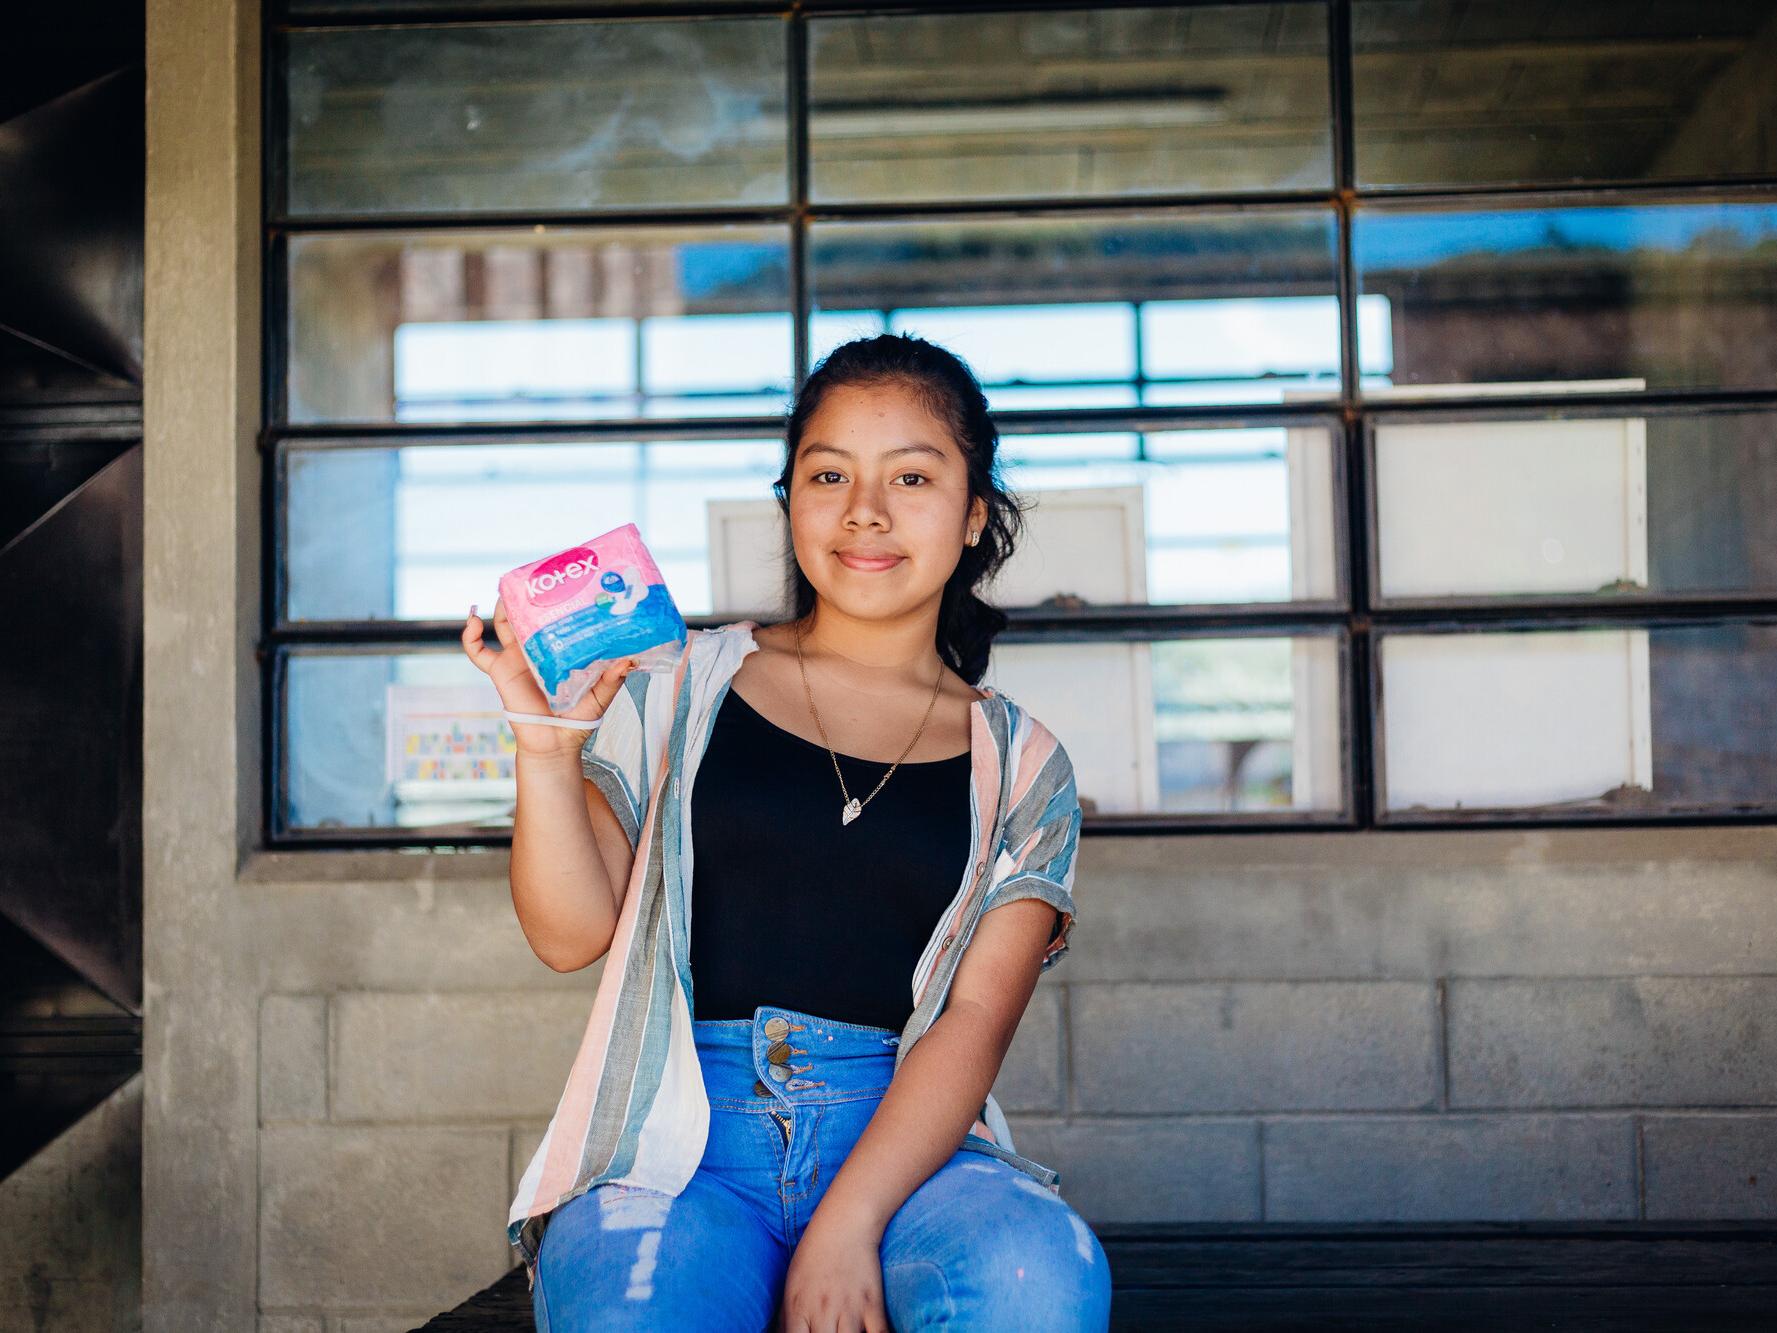 Dalila, 15, holding a dignity kit distributed by Plan International